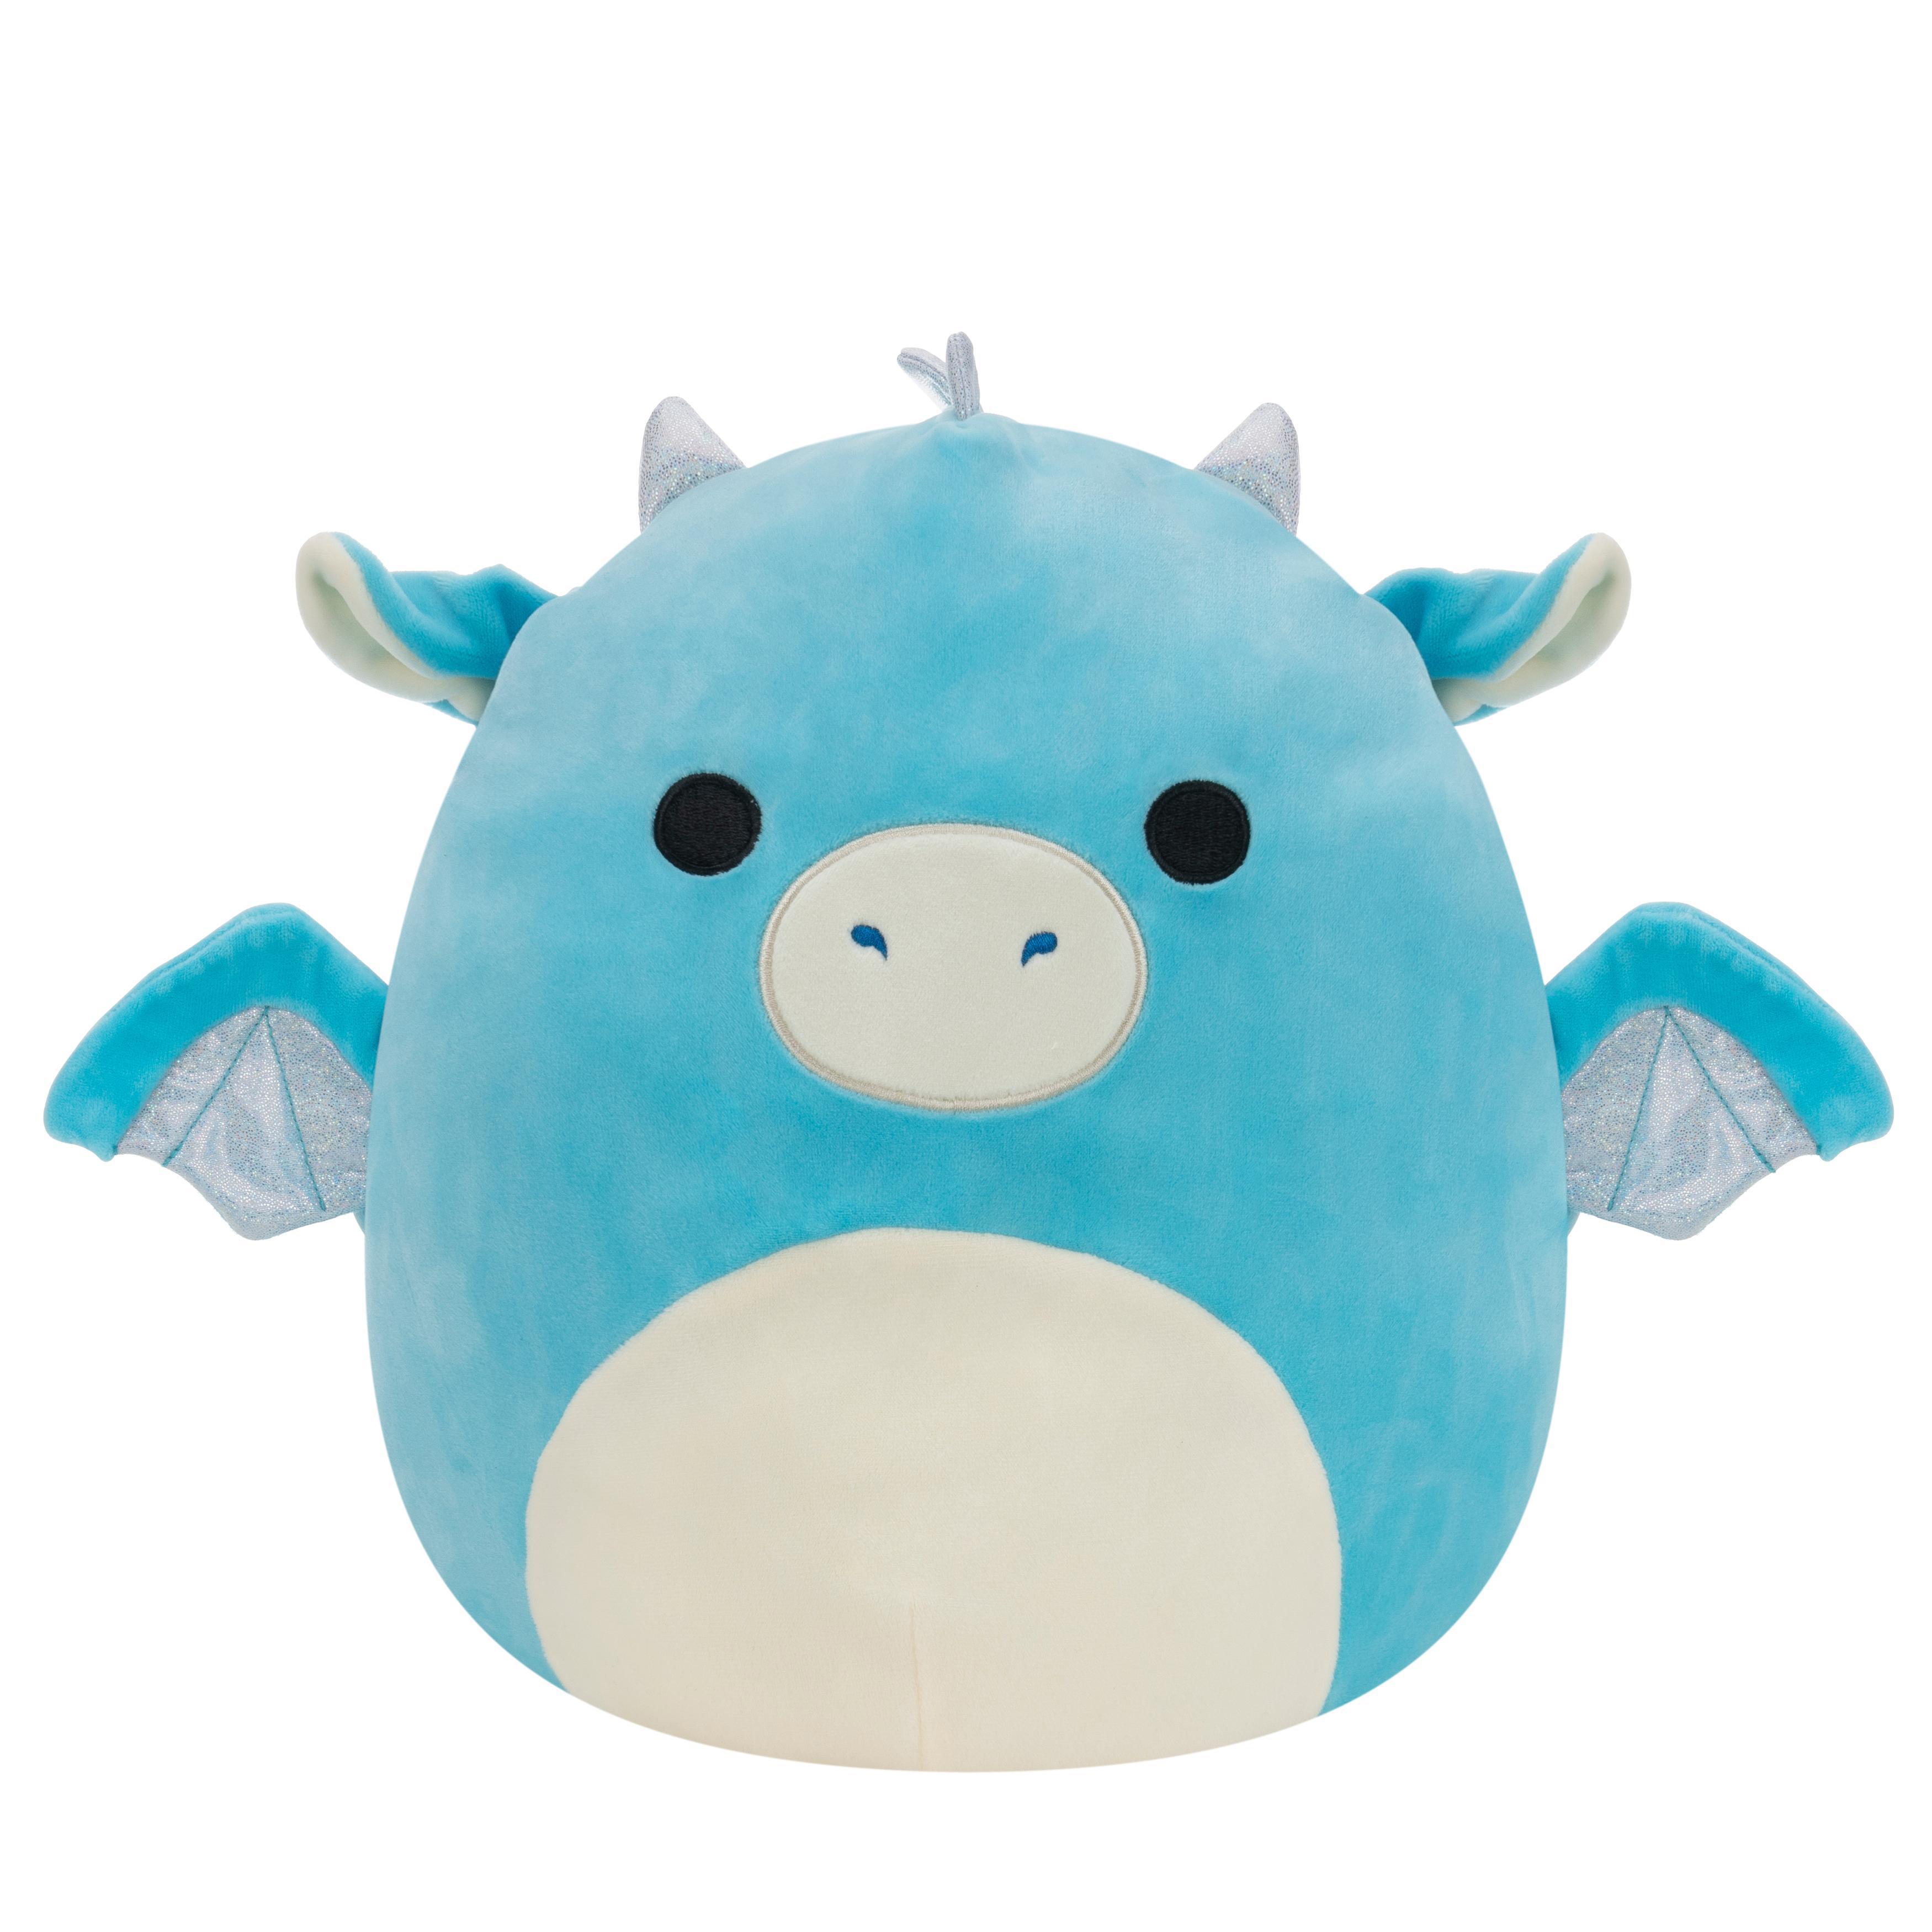 Buy Squishmallows - 40 cm Plush P14 - Miles the Teal Dragon (2417P14) -  Free shipping